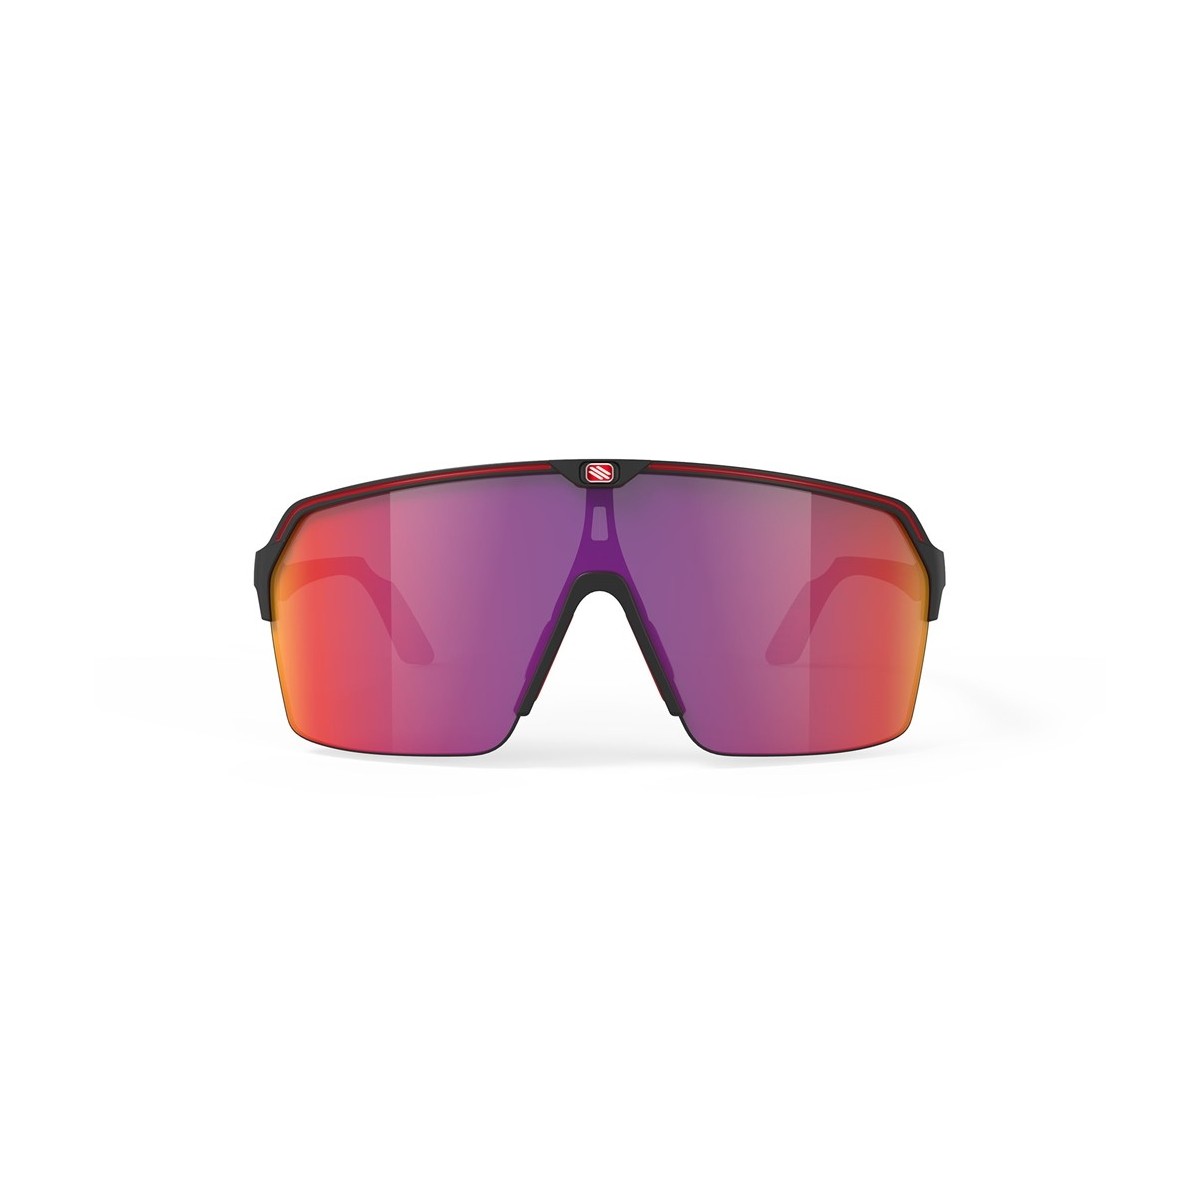 Image of Rudy Project Spinshield Air Brille mattschwarz mit roter RP-Multilaser-Linse